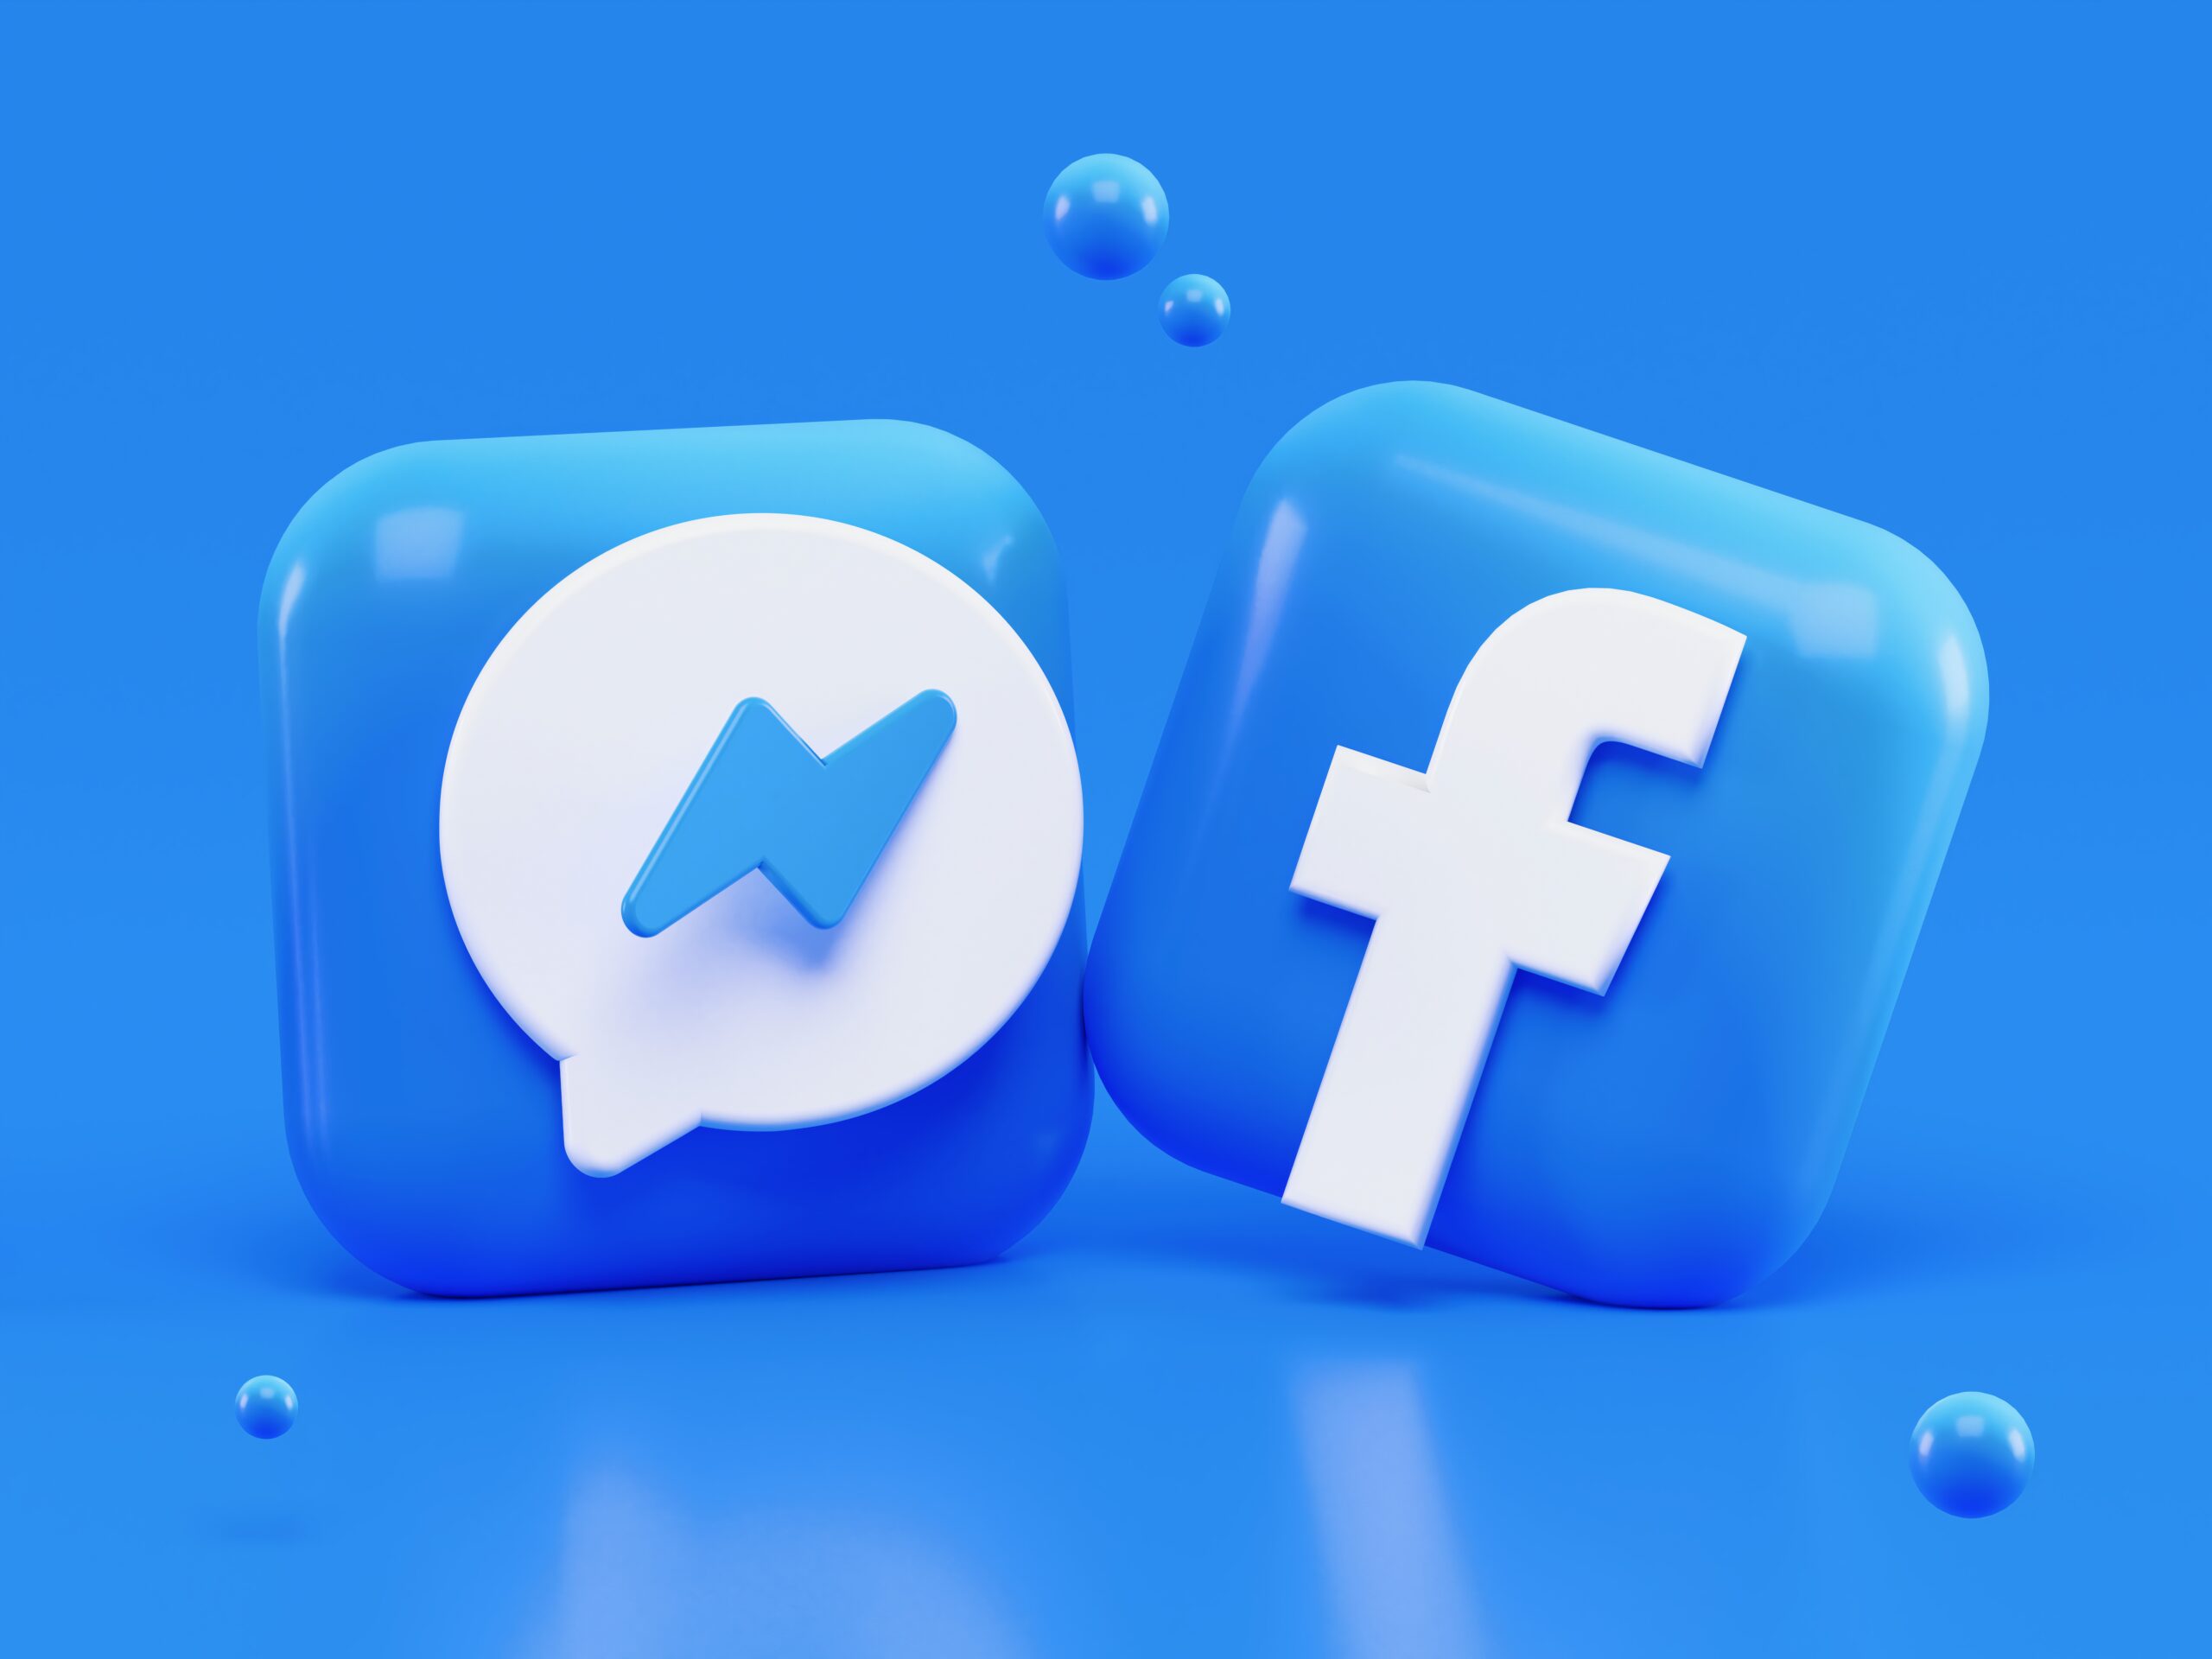 Facebook and facebook messanger logos with blue background